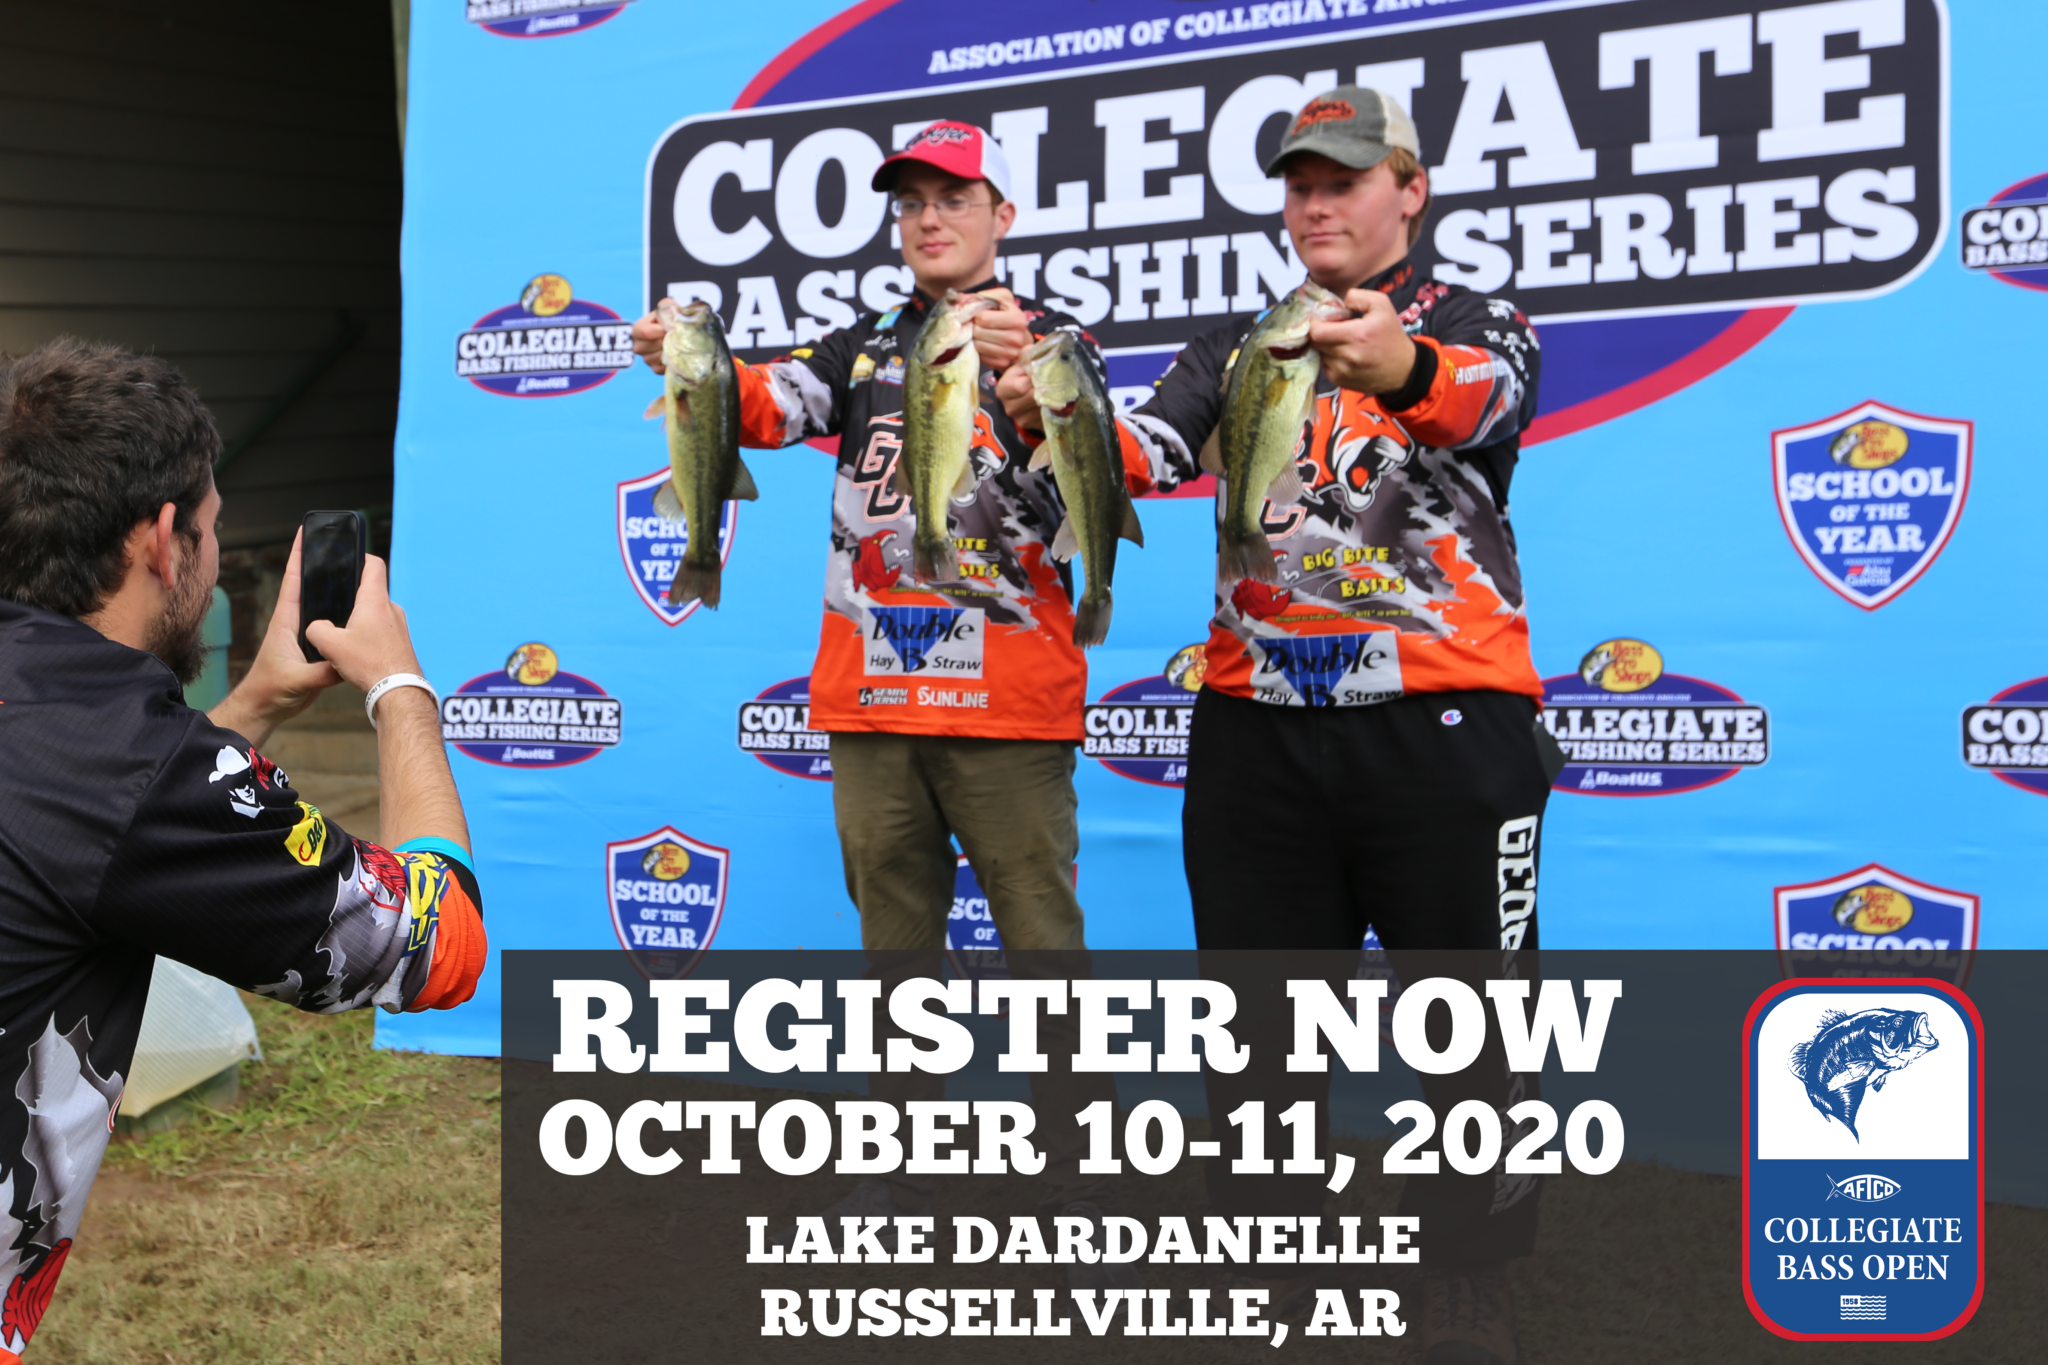 The Collegiate Bass Championship Archives - Page 67 of 160